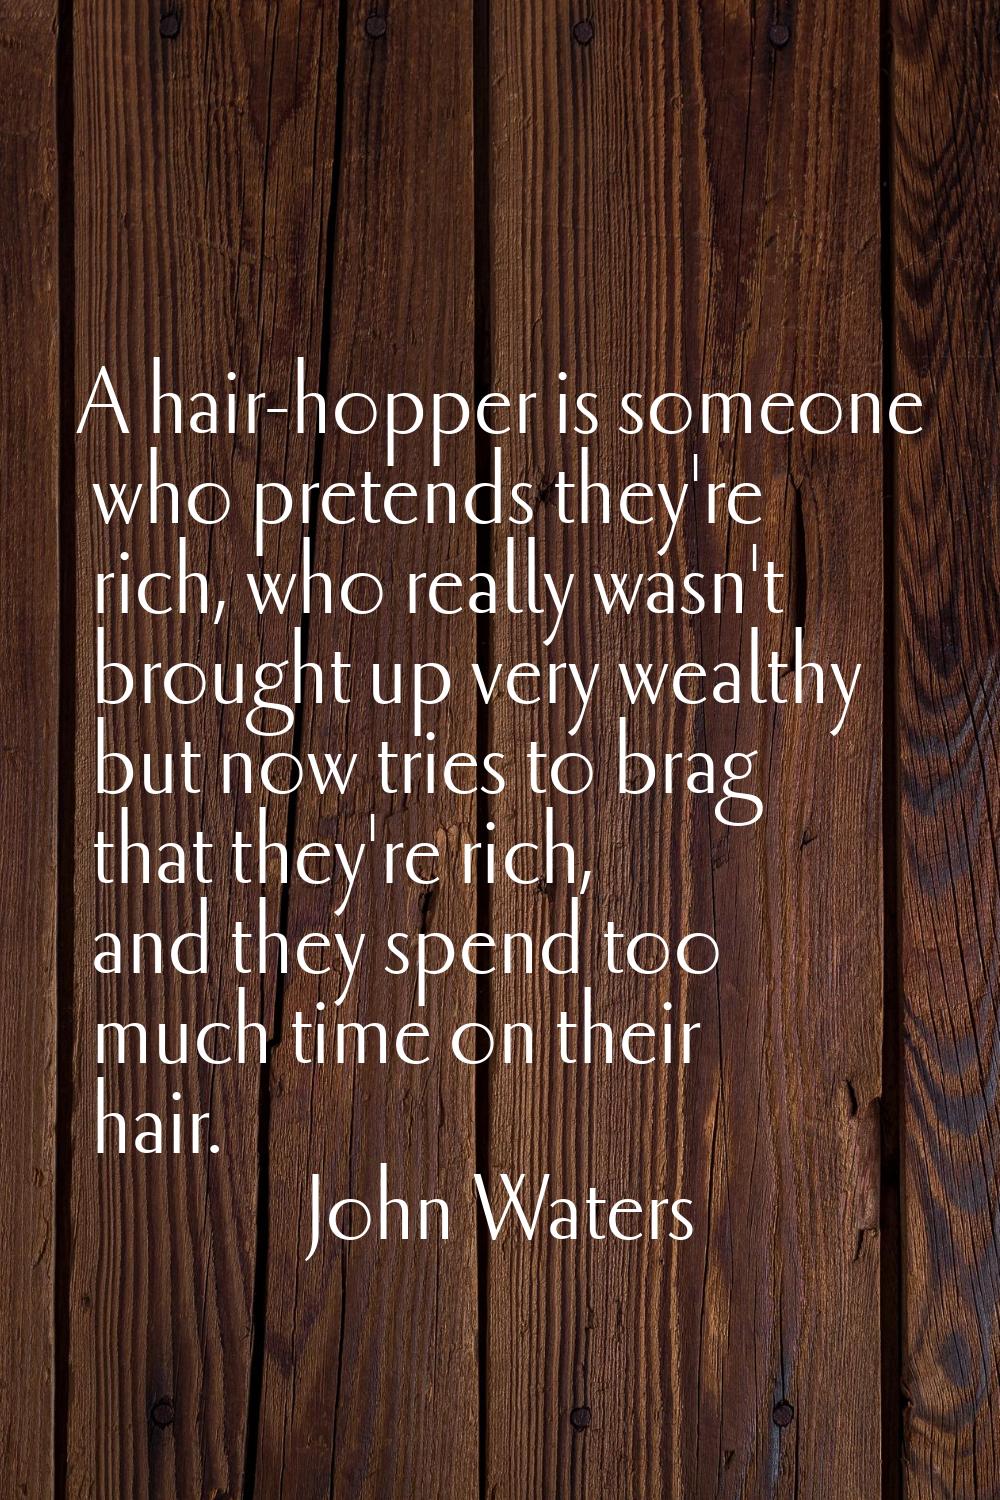 A hair-hopper is someone who pretends they're rich, who really wasn't brought up very wealthy but n